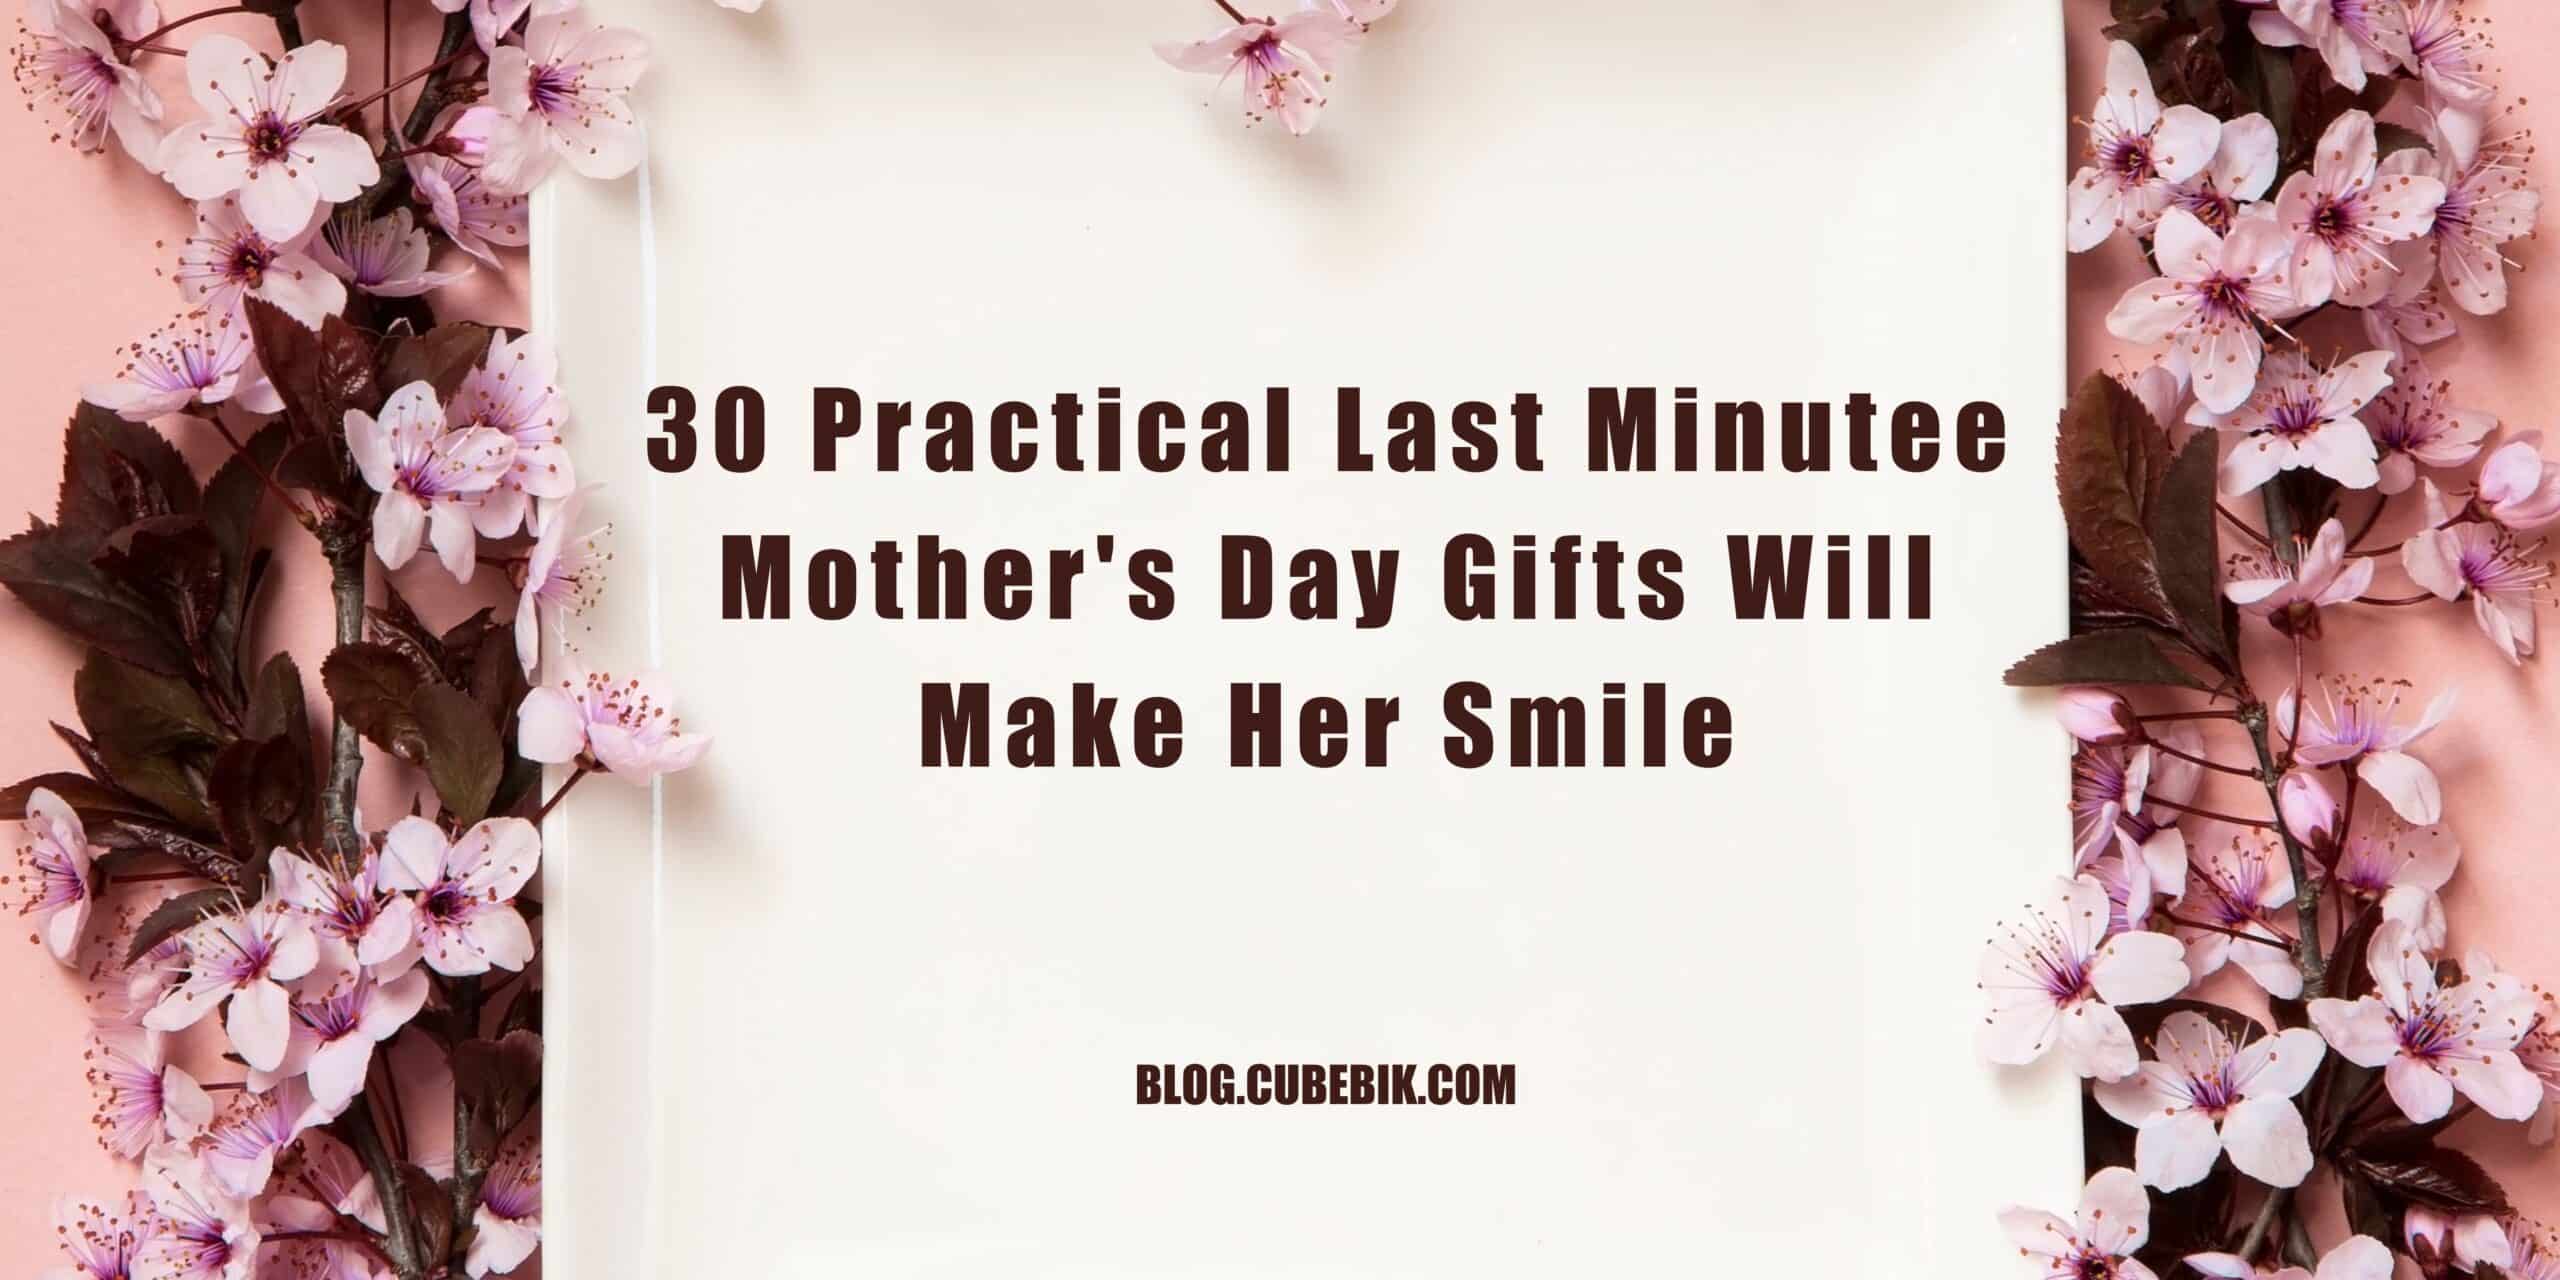 30 Practical Last Minutee Mothers Day Gifts Will Make Her Smile Scaled - Last Minute Mother'S Day Gifts | Cubebik Blog